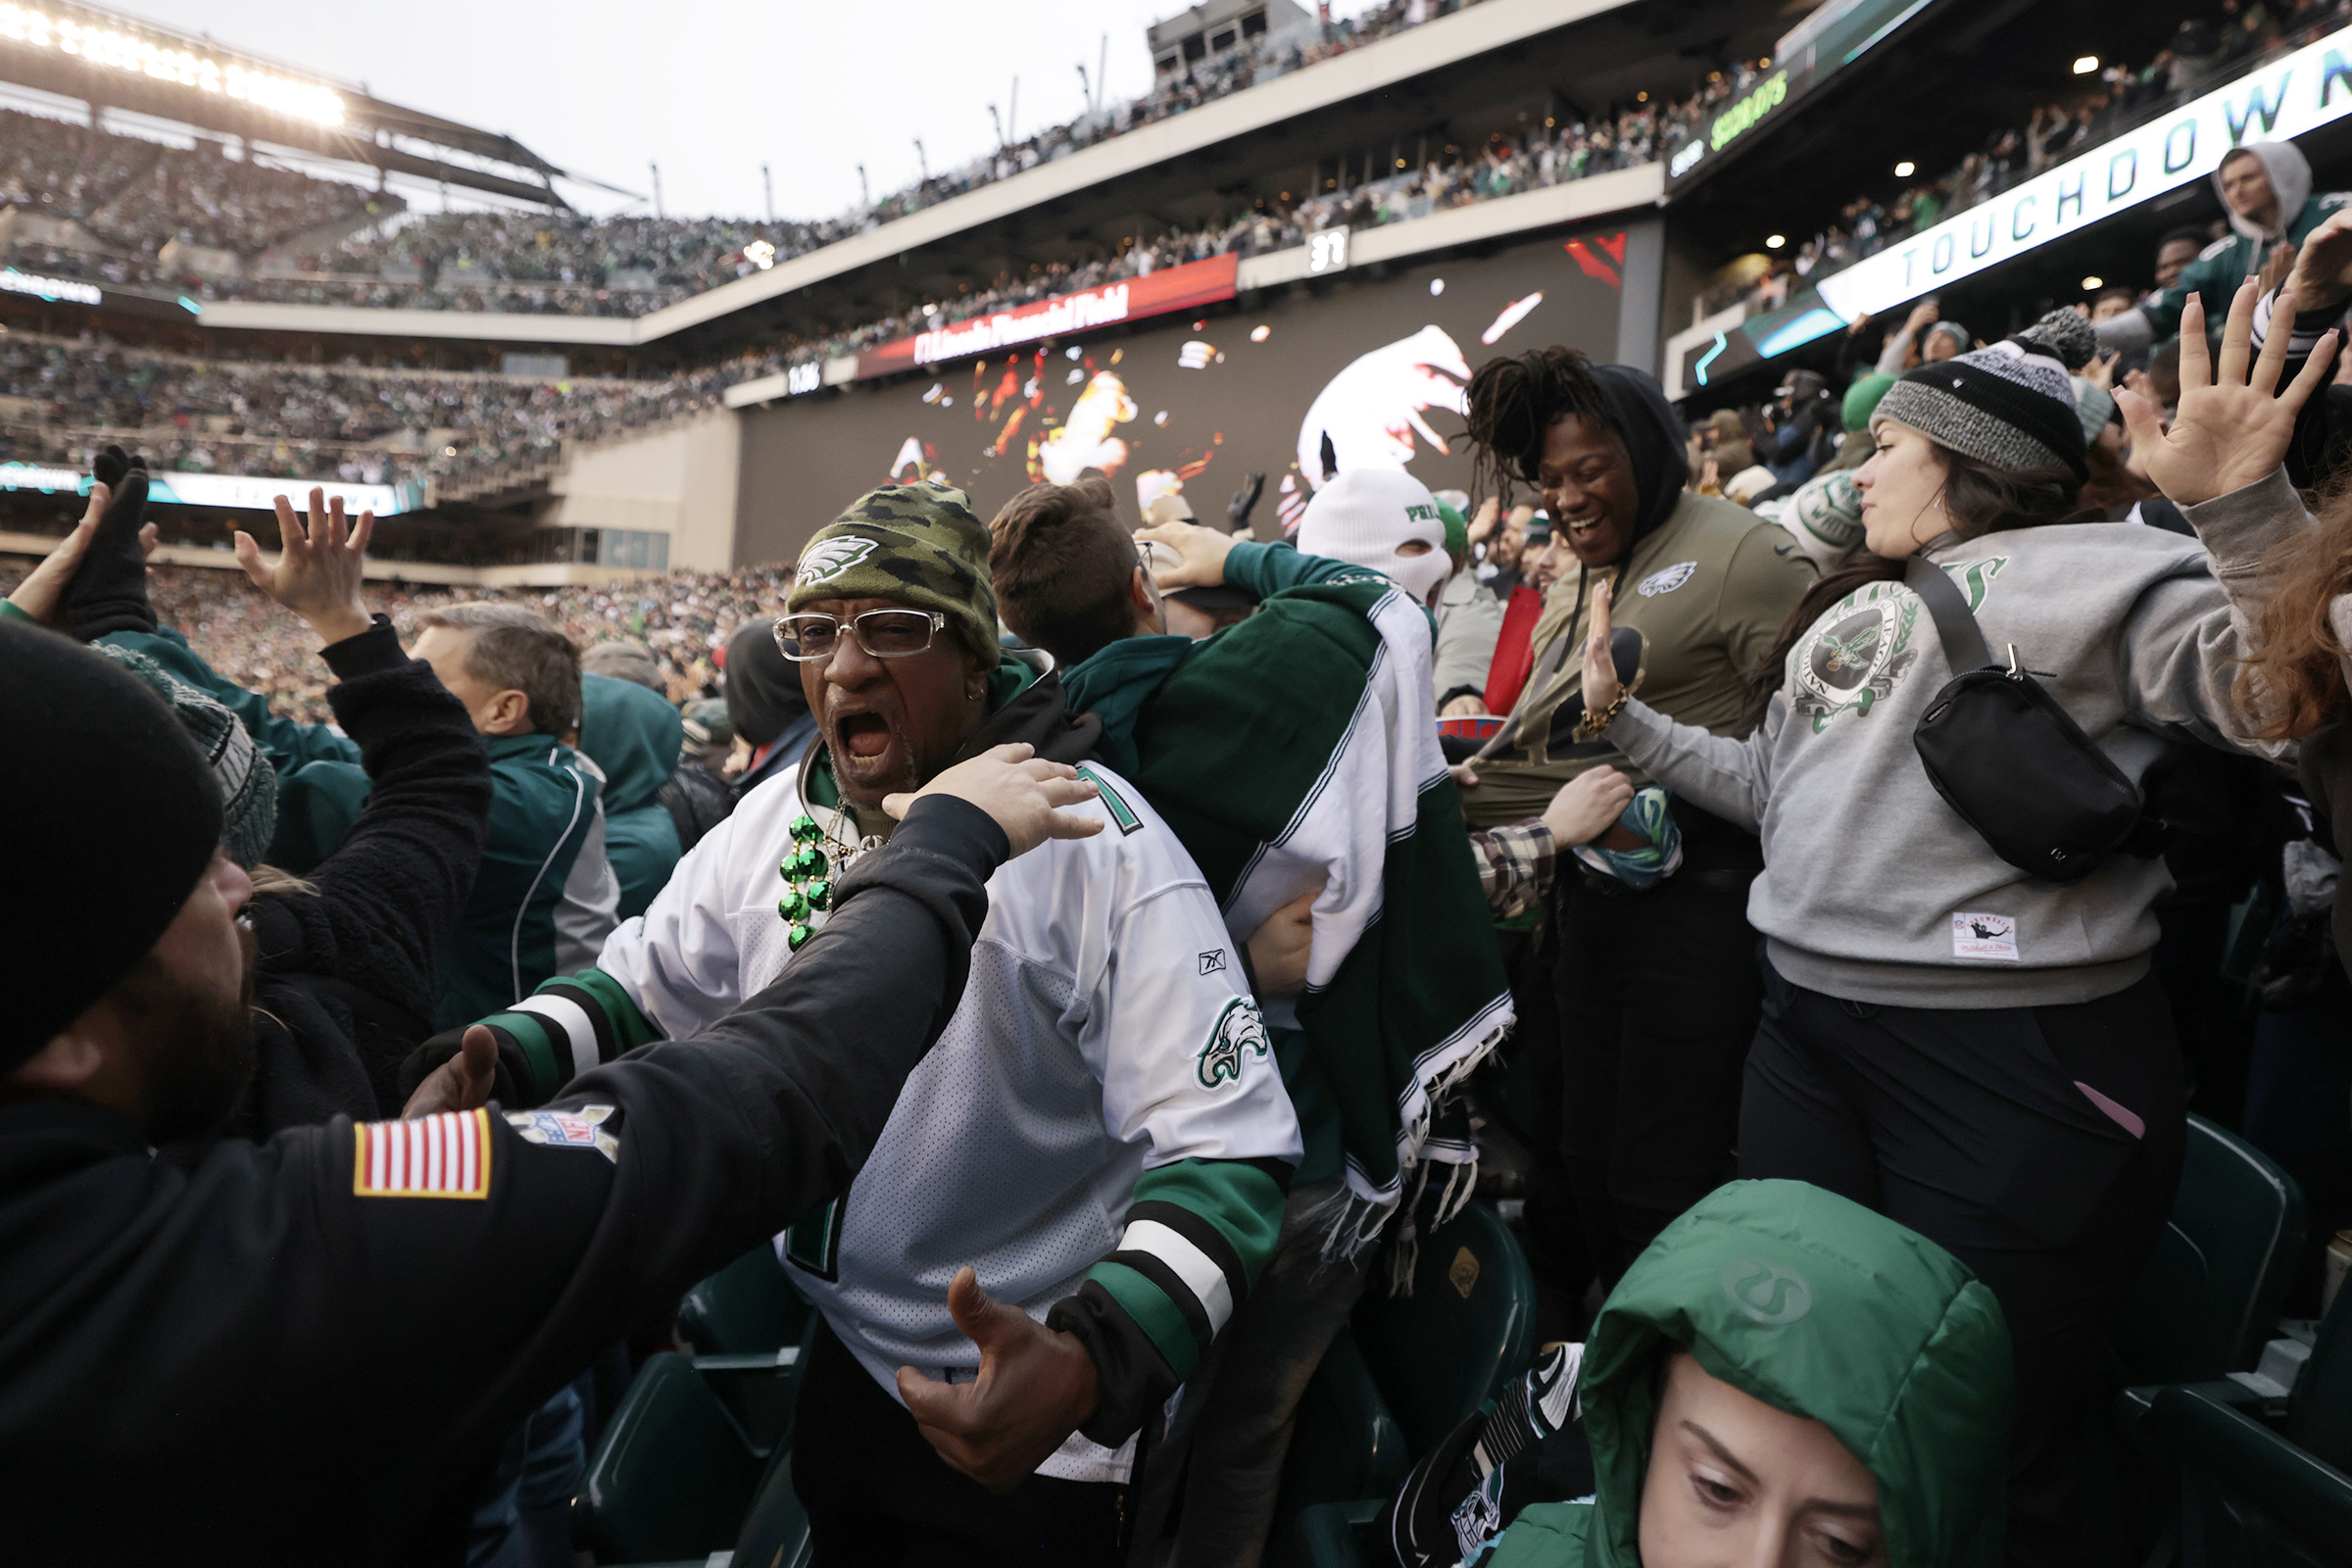 Brock roast,' jeers and cheers: See Eagles fans gear up for the NFC  championship game